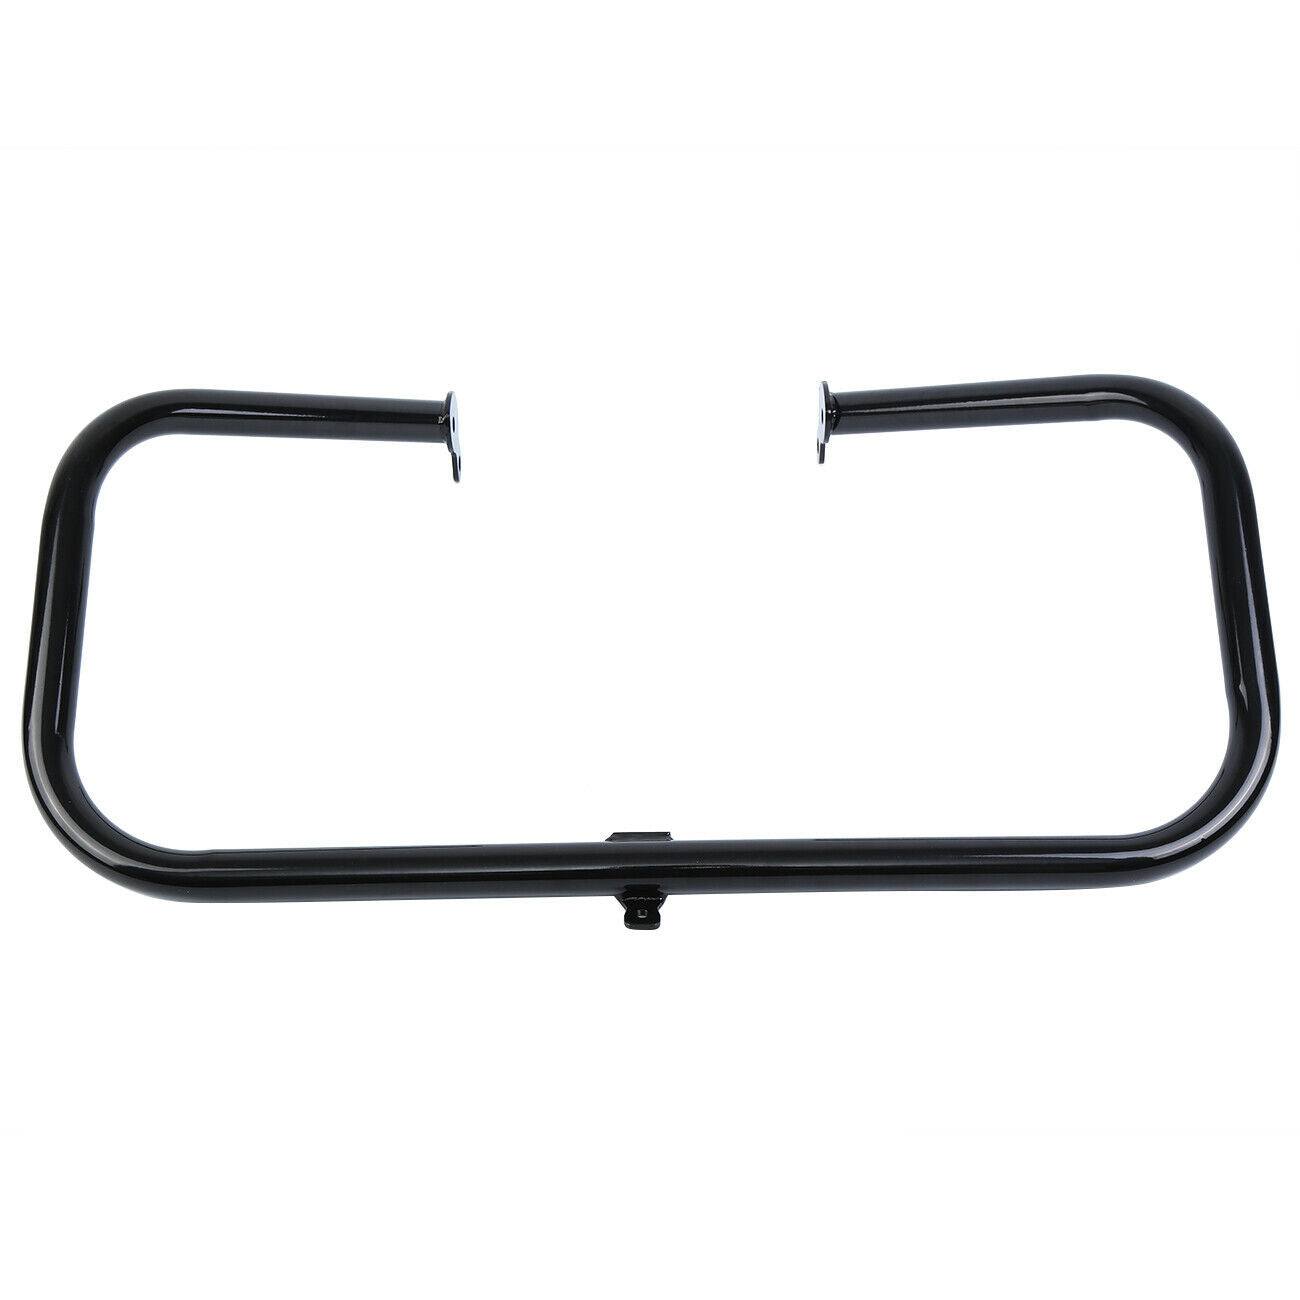 Engine Highway Crash Guard Bar Fit For Harley Touring Road Street Glide 09-2022 - Moto Life Products